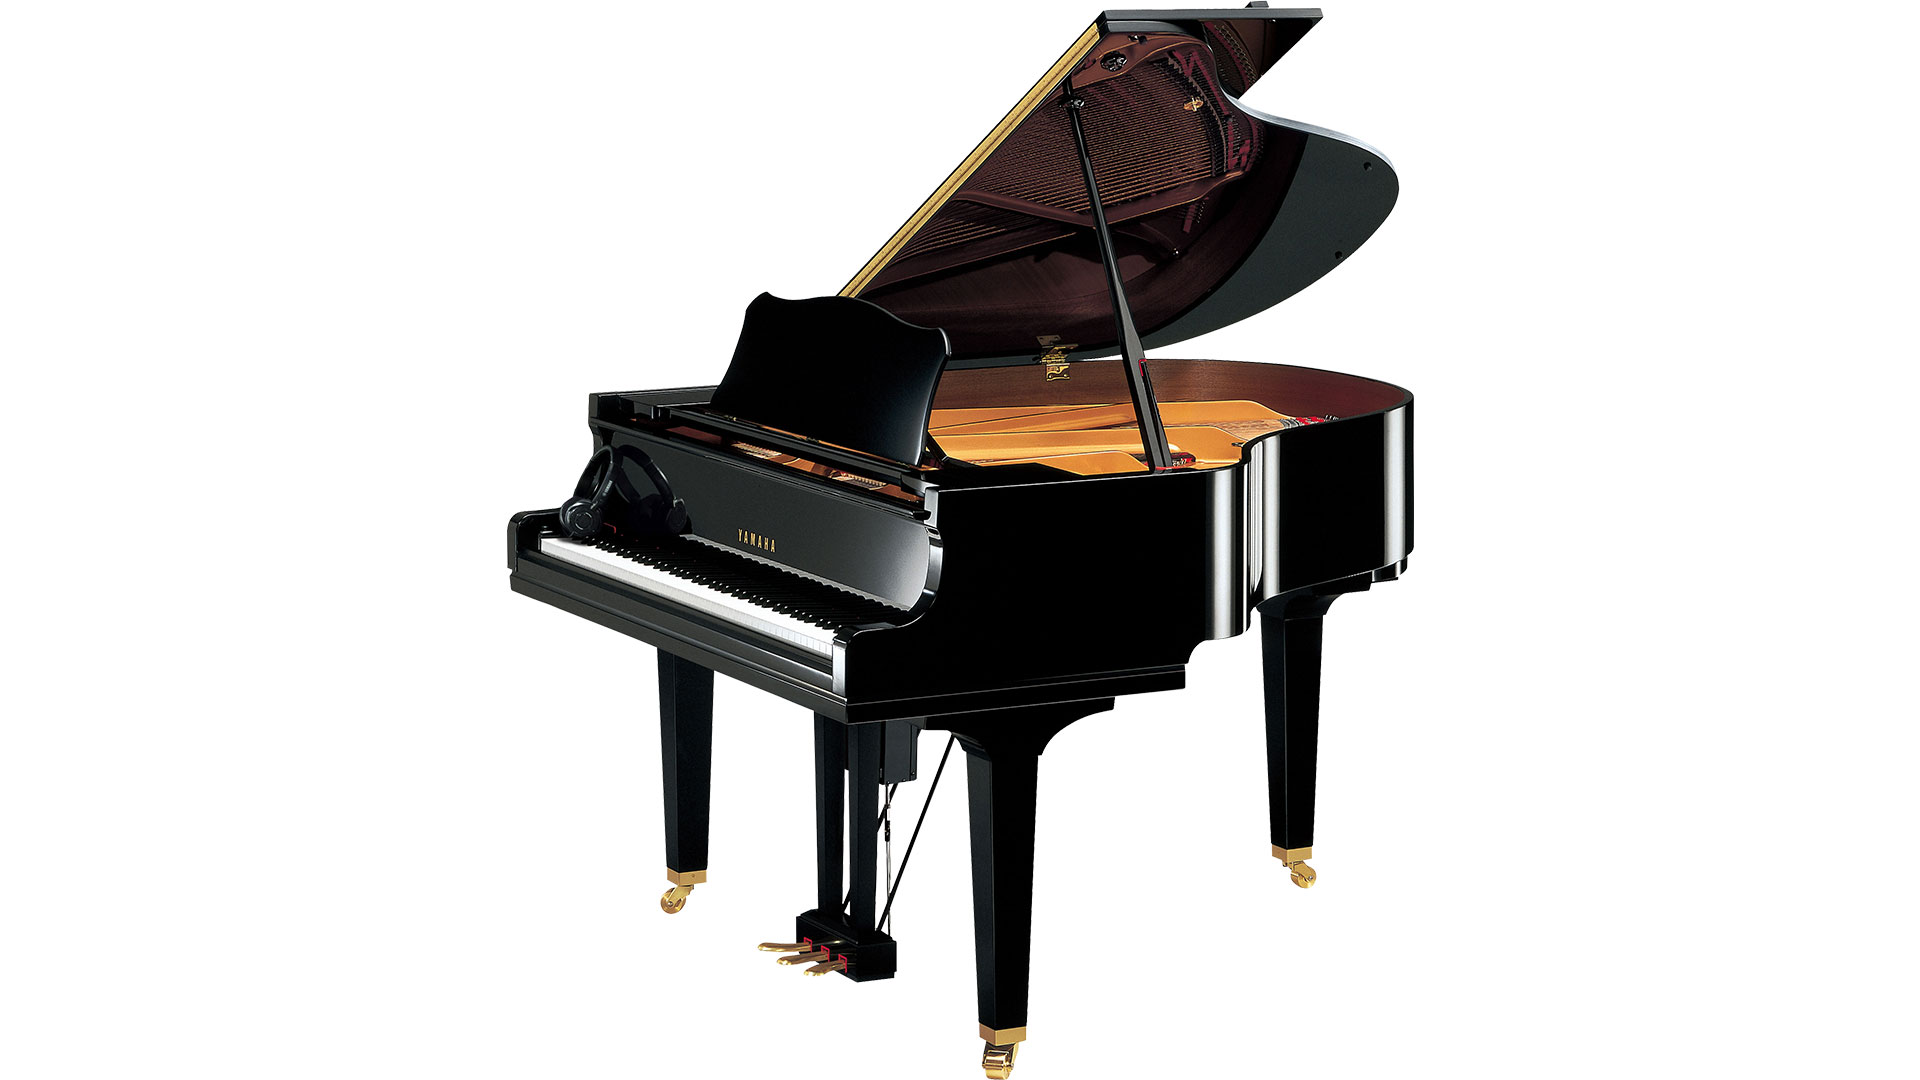 
Yamaha Transacoustic Piano Price: Is It Worth The Investment? Find Out Here!